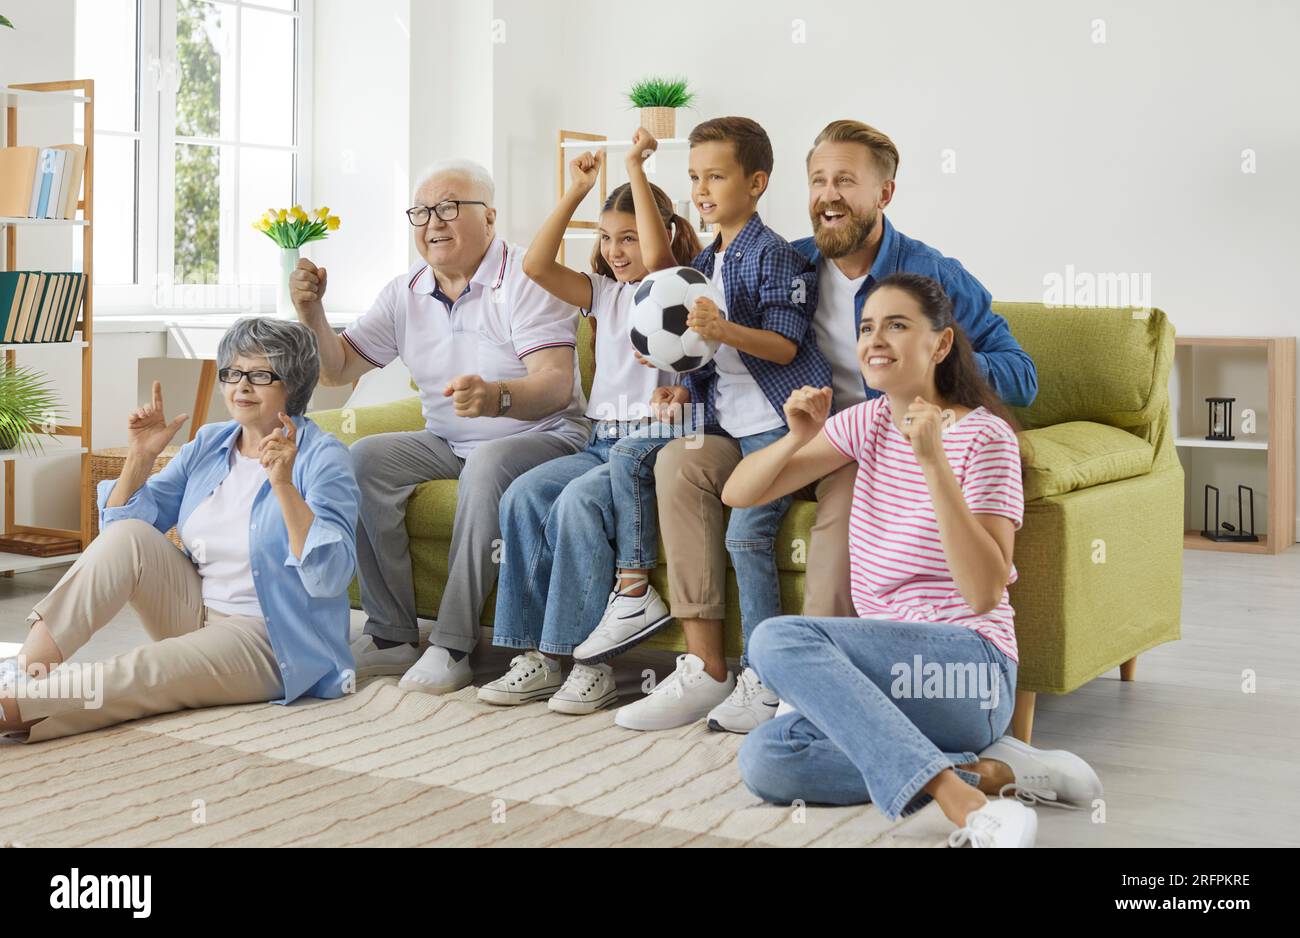 Family grandparents, parents and children football fans watching soccer game on TV. Stock Photo